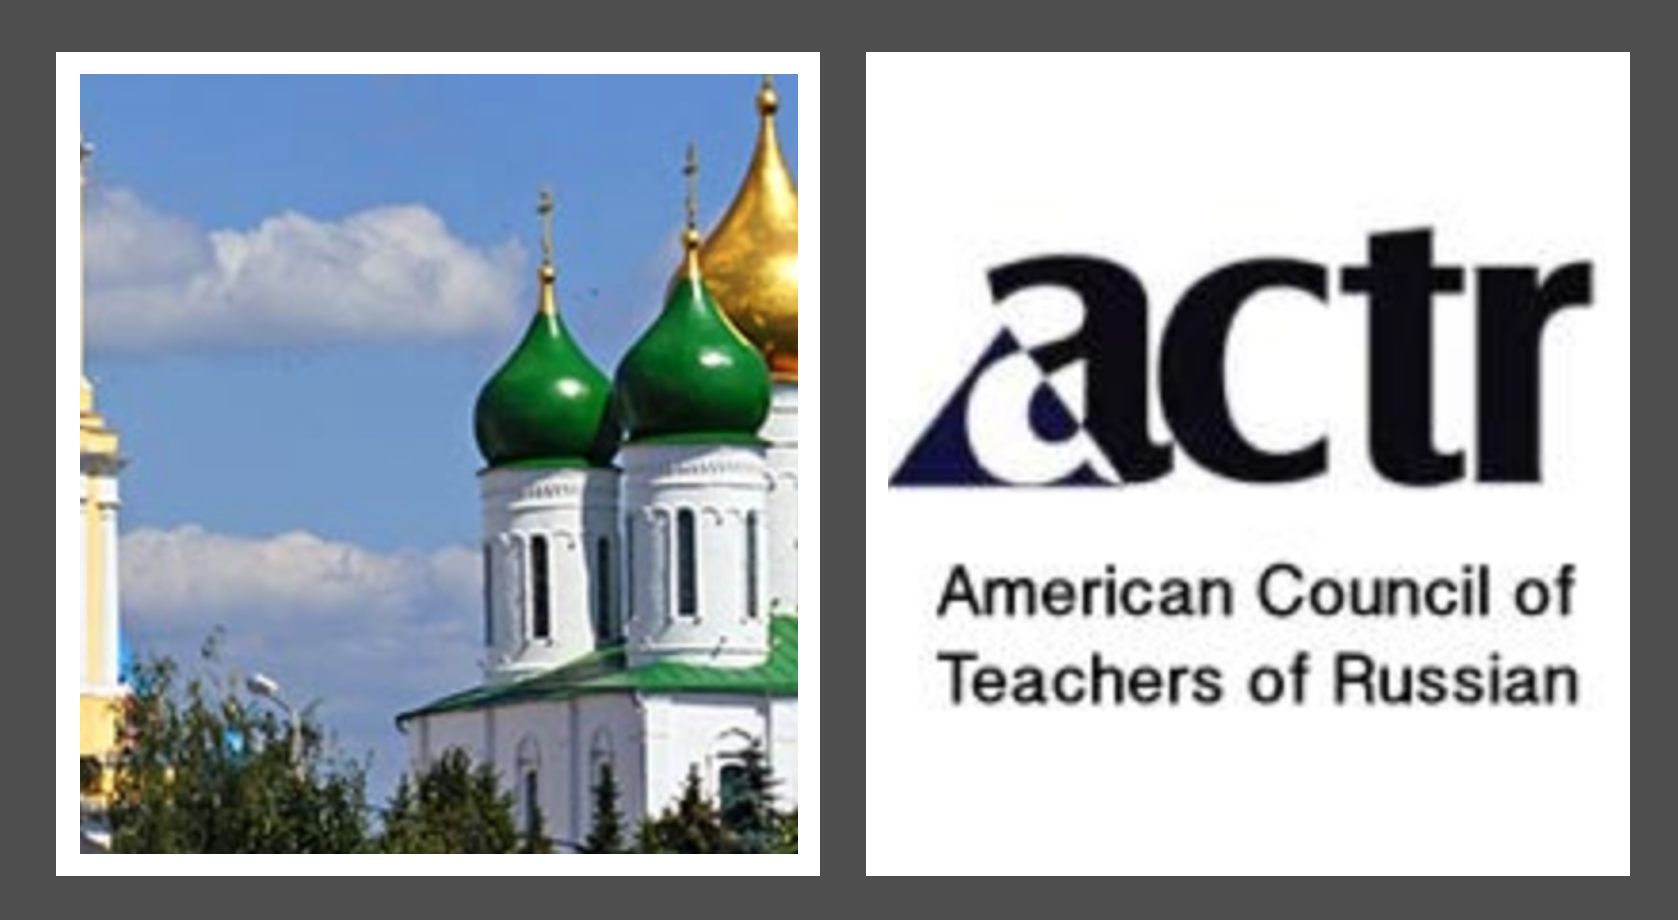 national russian essay contest